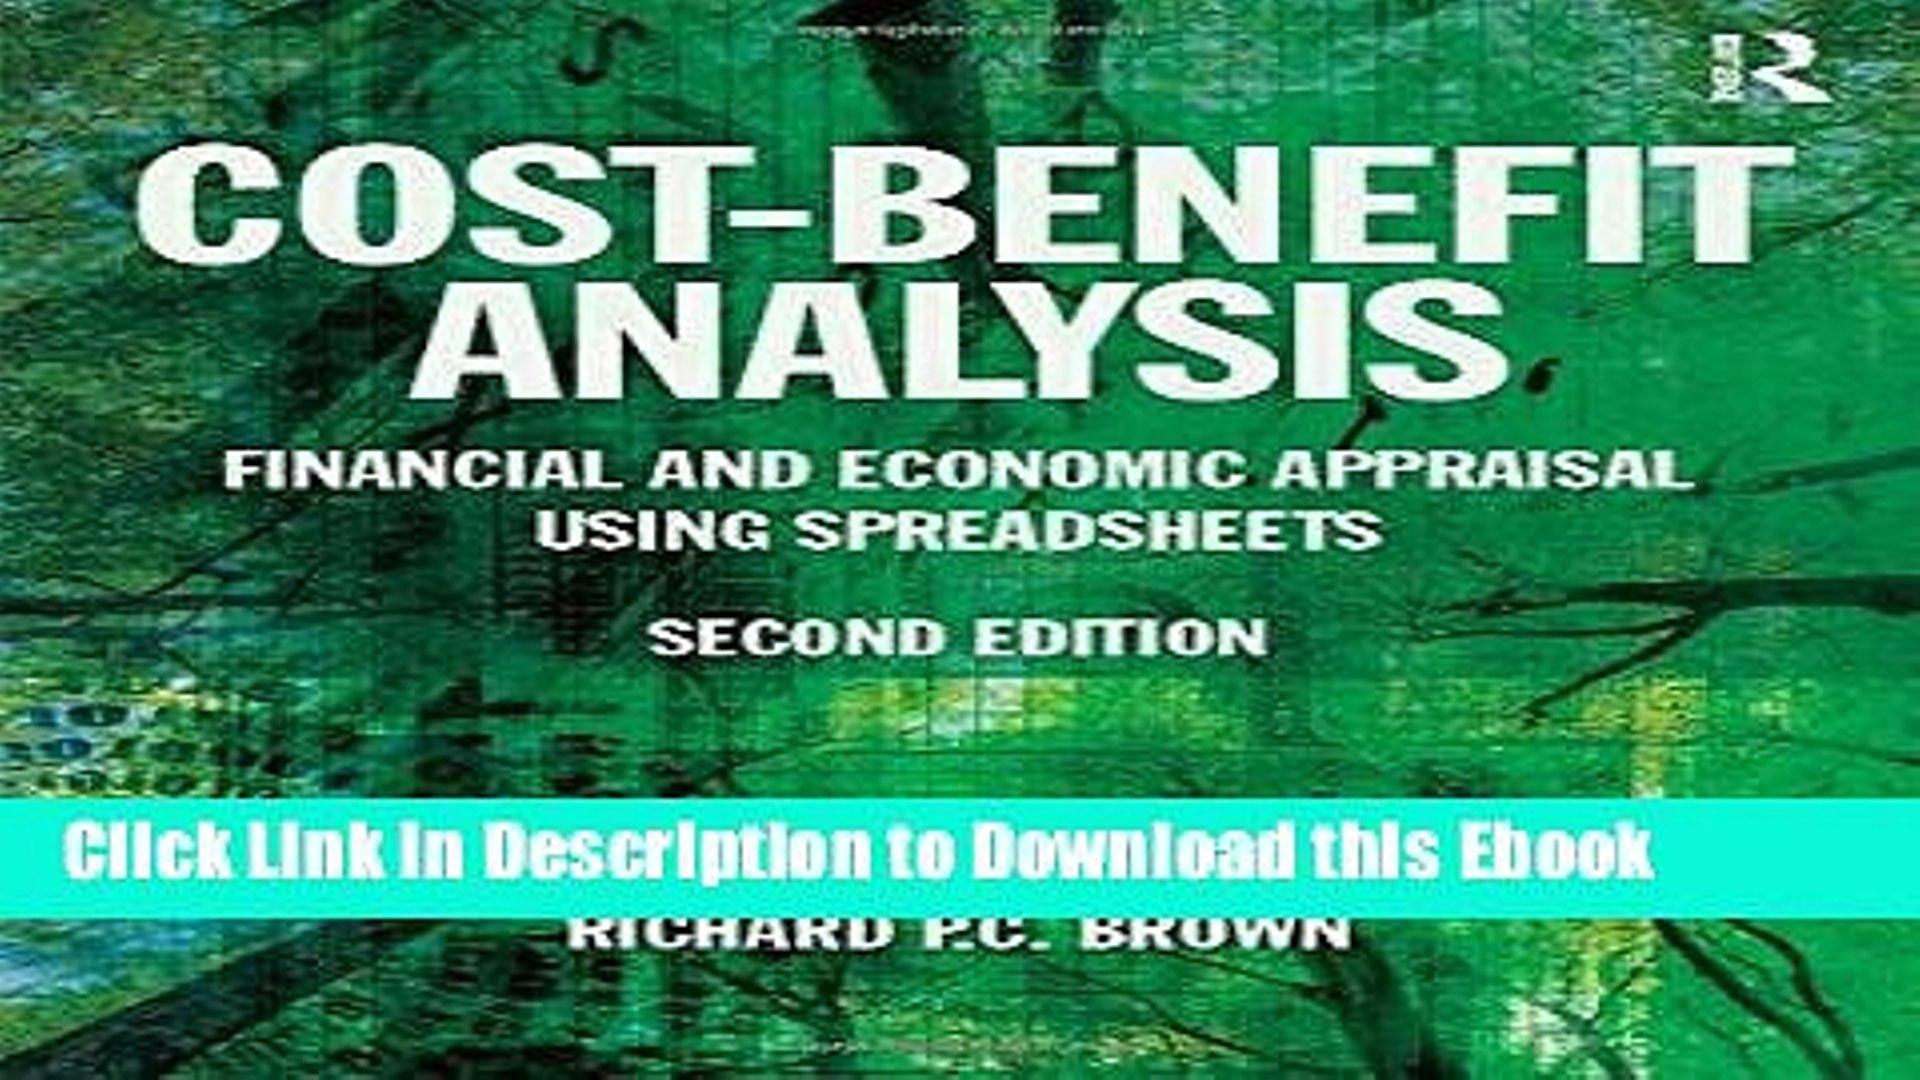 Cost Benefit Analysis Financial And Economic Appraisal Using Spreadsheets Regarding Pdf] Download Costbenefit Analysis: Financial And Economic